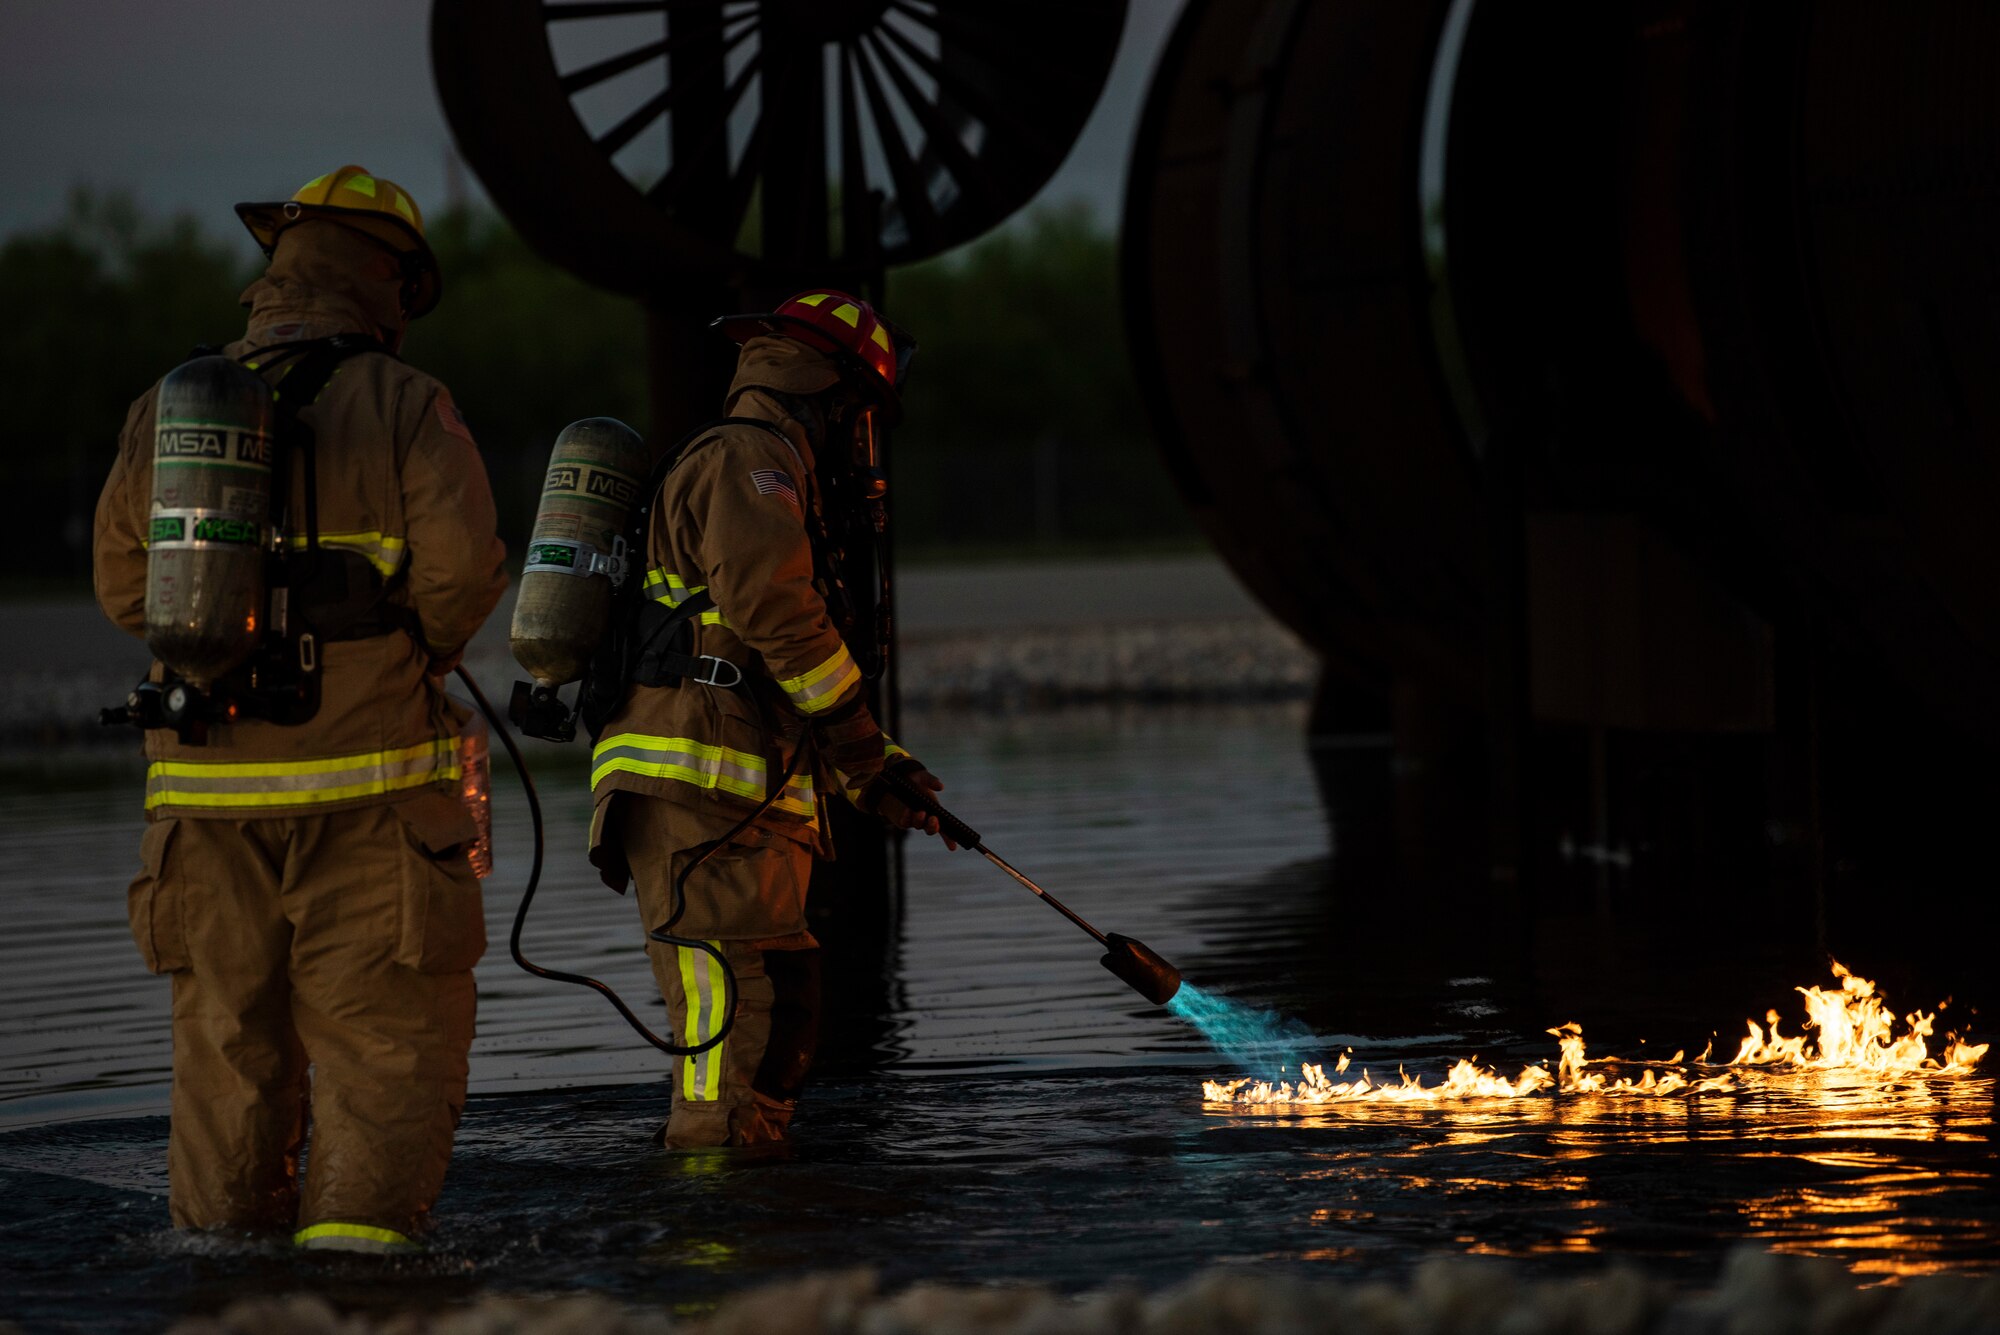 Two firefighters assigned to the 7th Civil Engineer Squadron ignite a fire during a nighttime aircraft fire training at Dyess Air Force Base, Texas, May 4, 2021. During the live fire training, a flammable gas was ignited on the surface of the water to simulate the pooling and burning of jet fuel around an aircraft. (U.S. Air Force photo by Airman 1st Class Colin Hollowell)